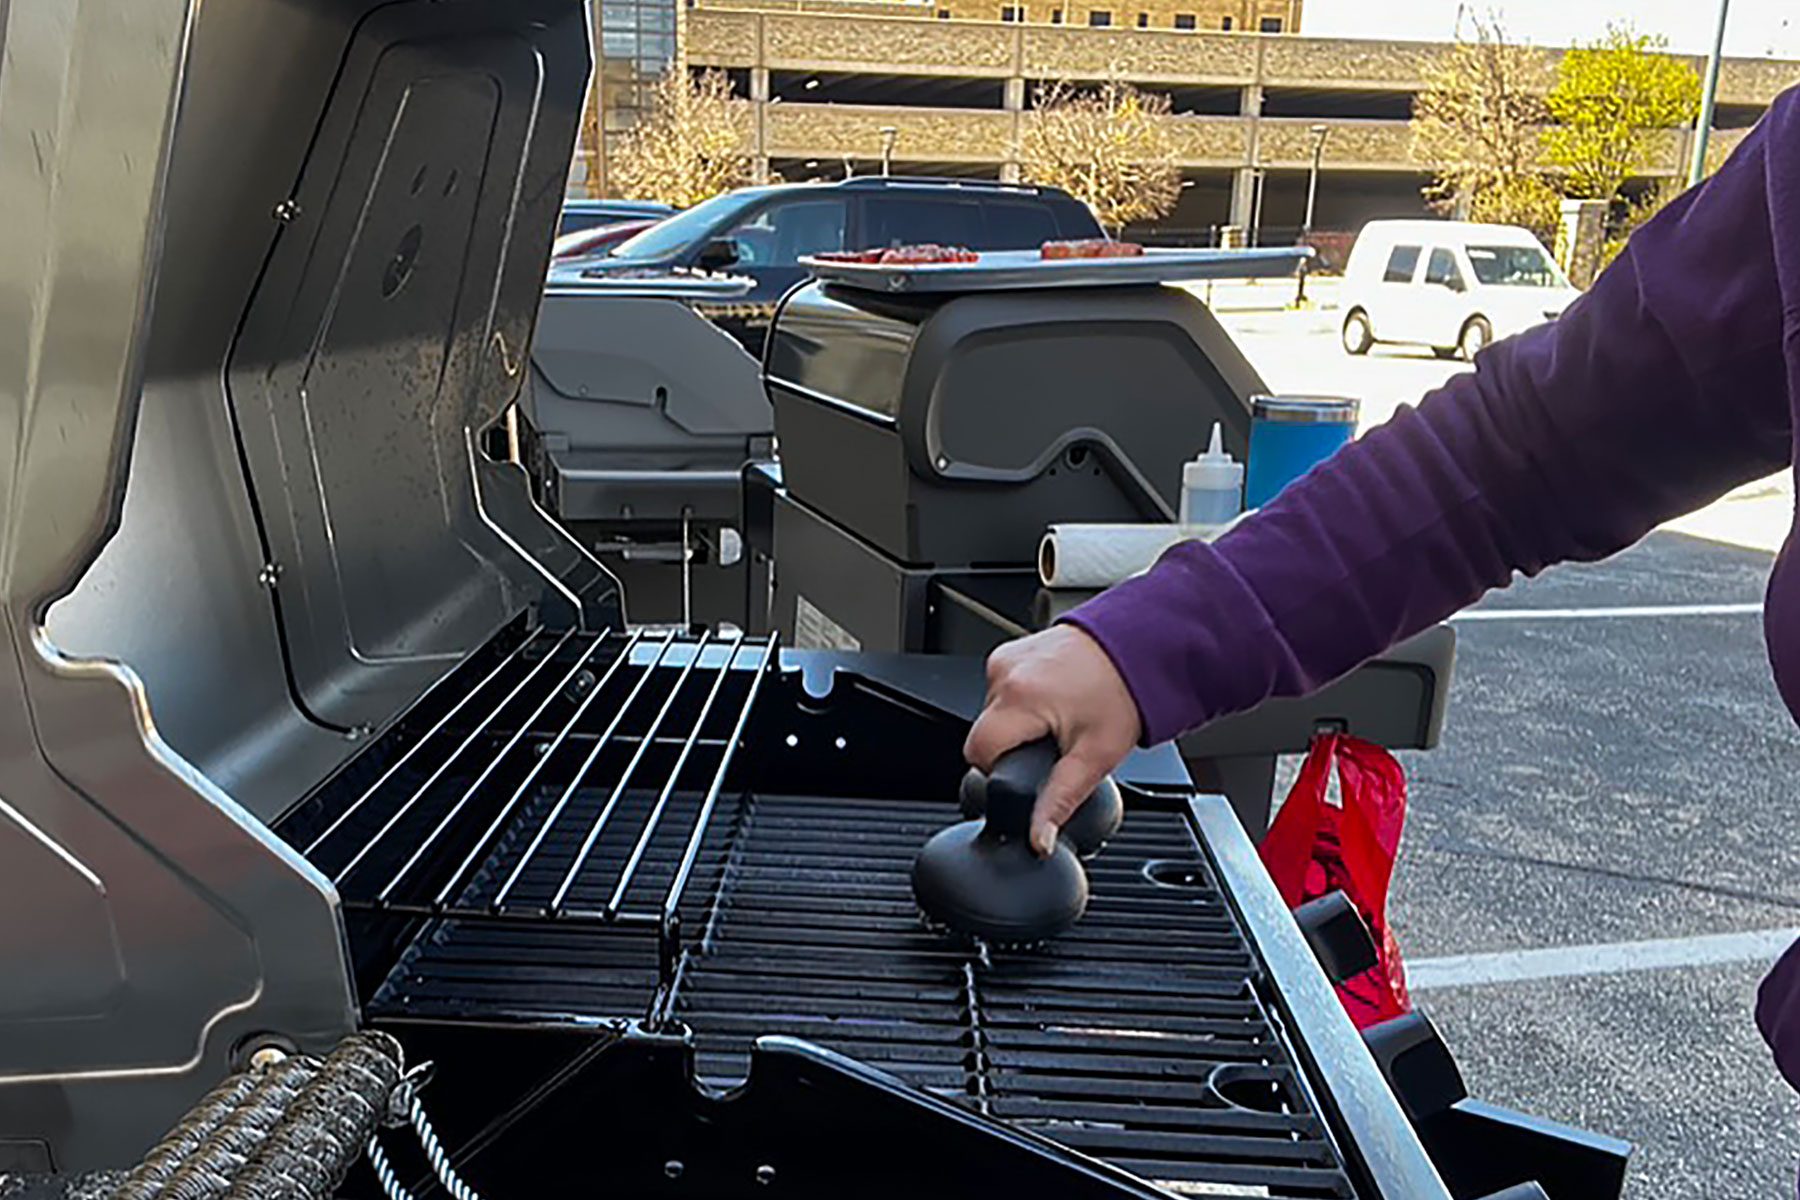 Woman using grill cleaner in parking area